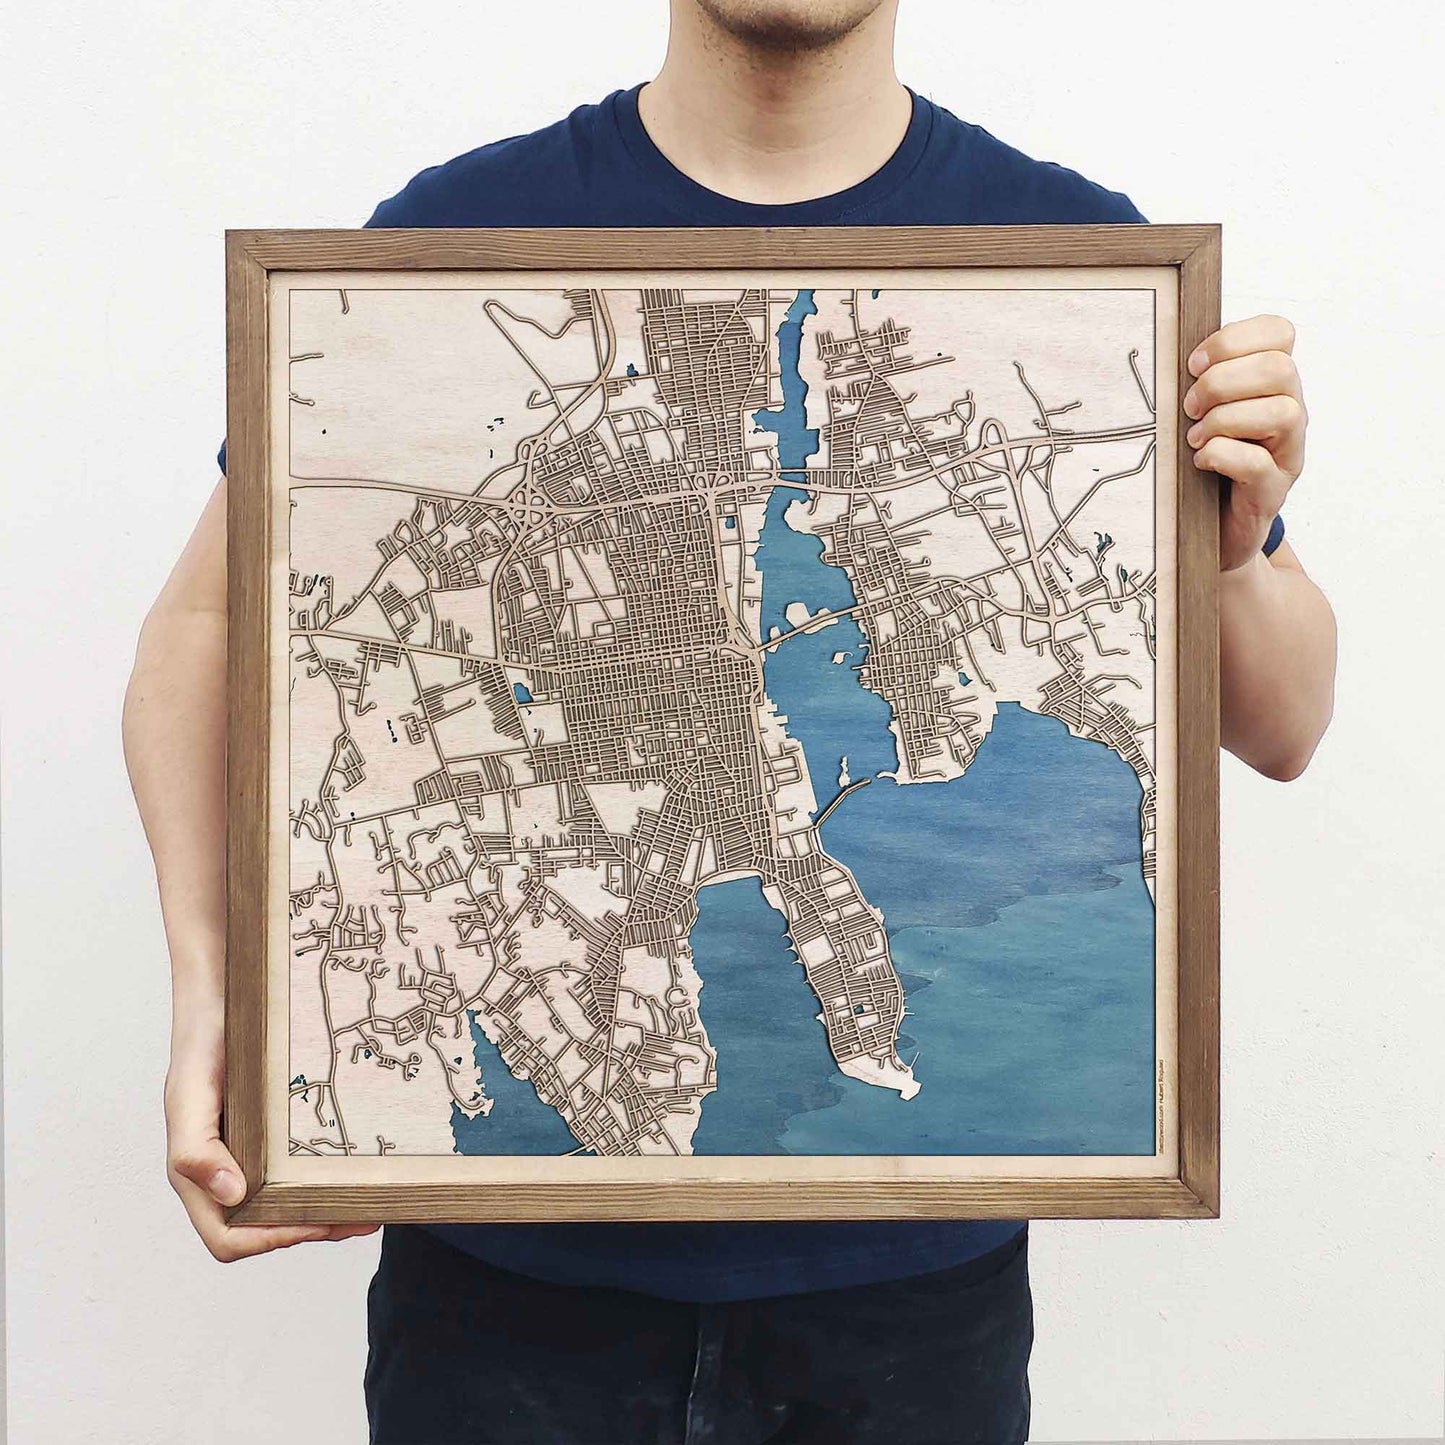 New Bedford Wooden Map by CityWood - Custom Wood Map Art - Unique Laser Cut Engraved - Anniversary Gift